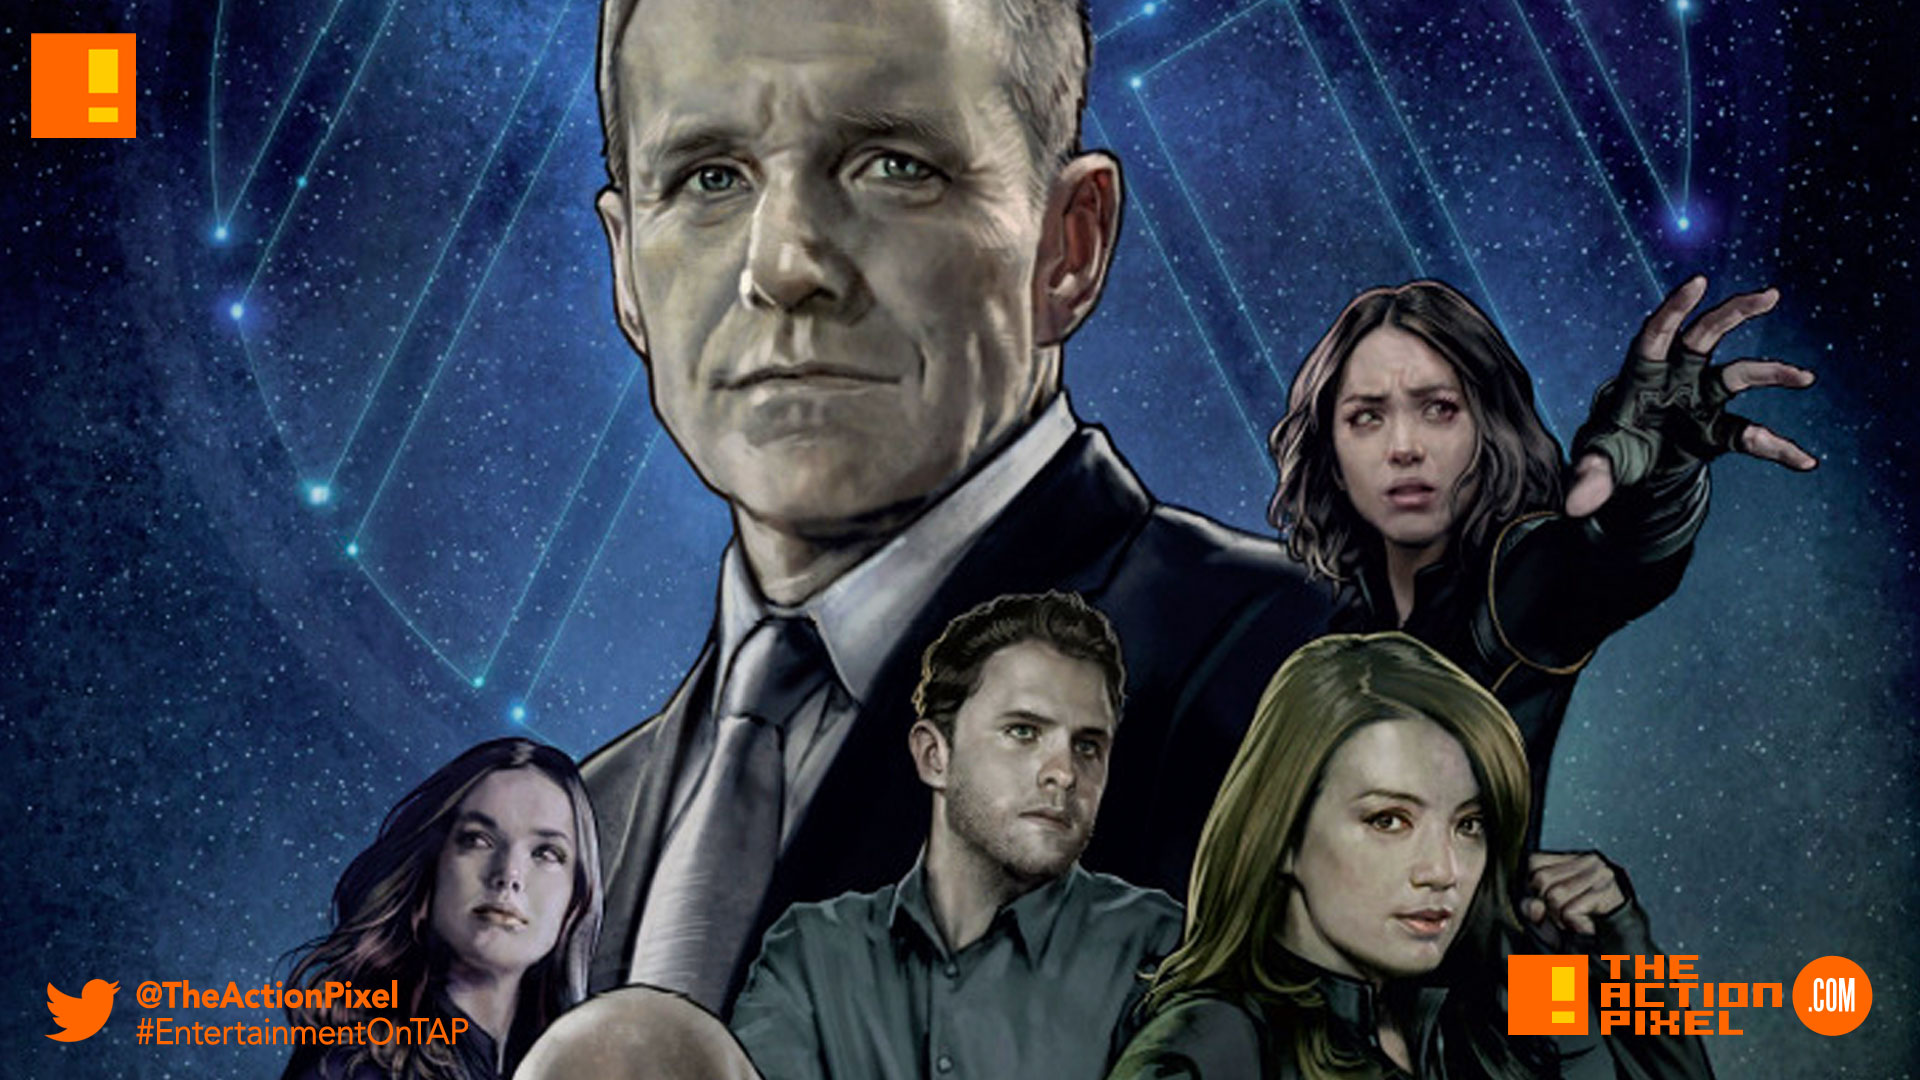 agents of shield, poster, the action pixel, entertainment on tap,poster,marvel tv, marvel